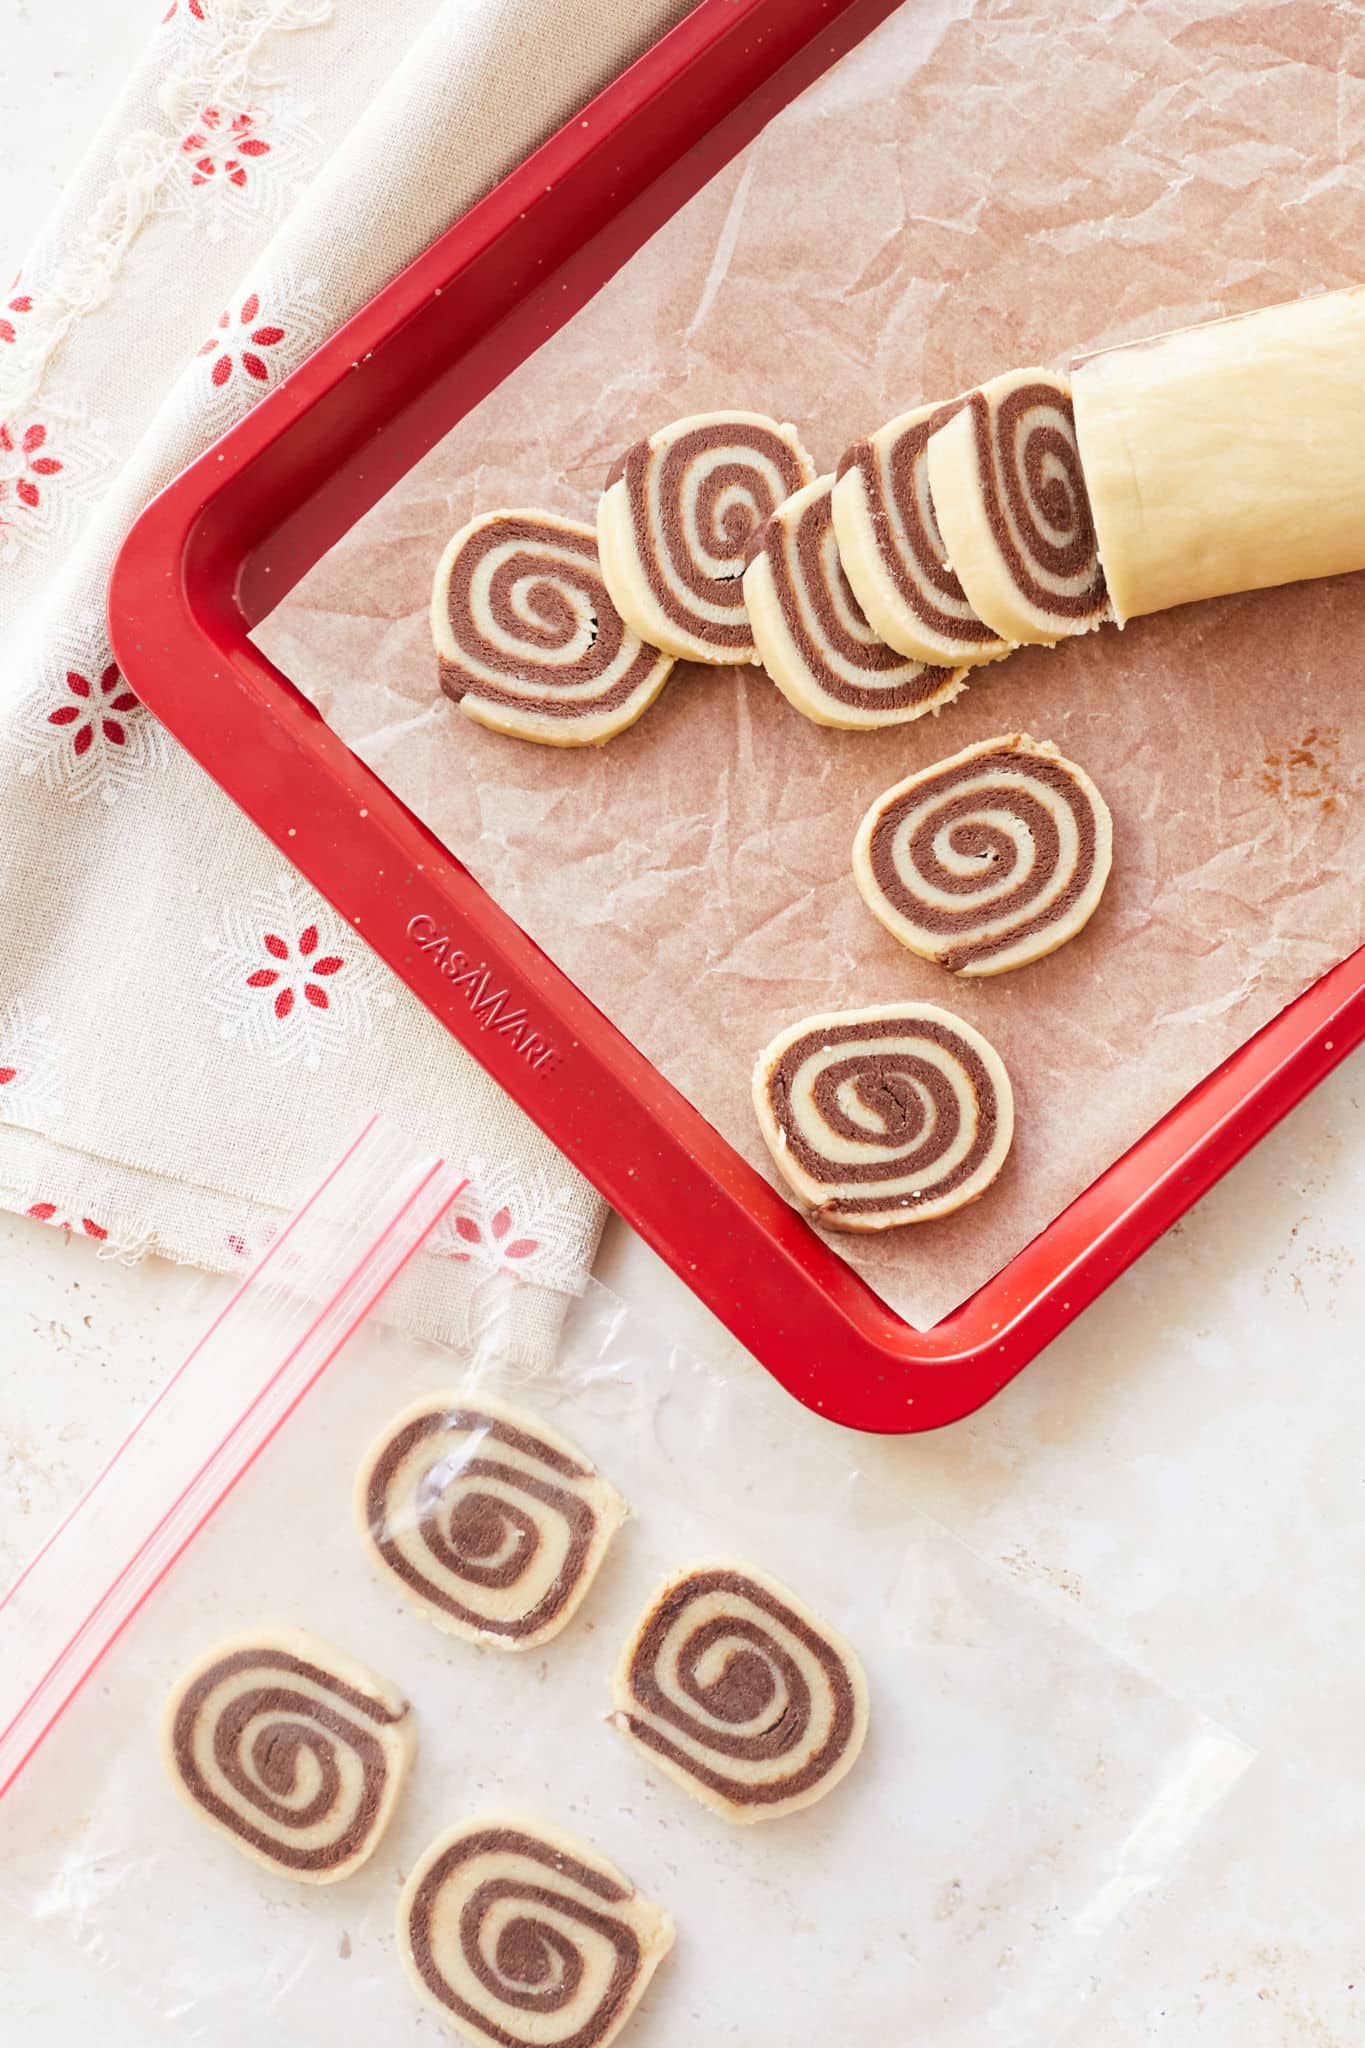 Sliced cookies on a baking tray and in a bag.